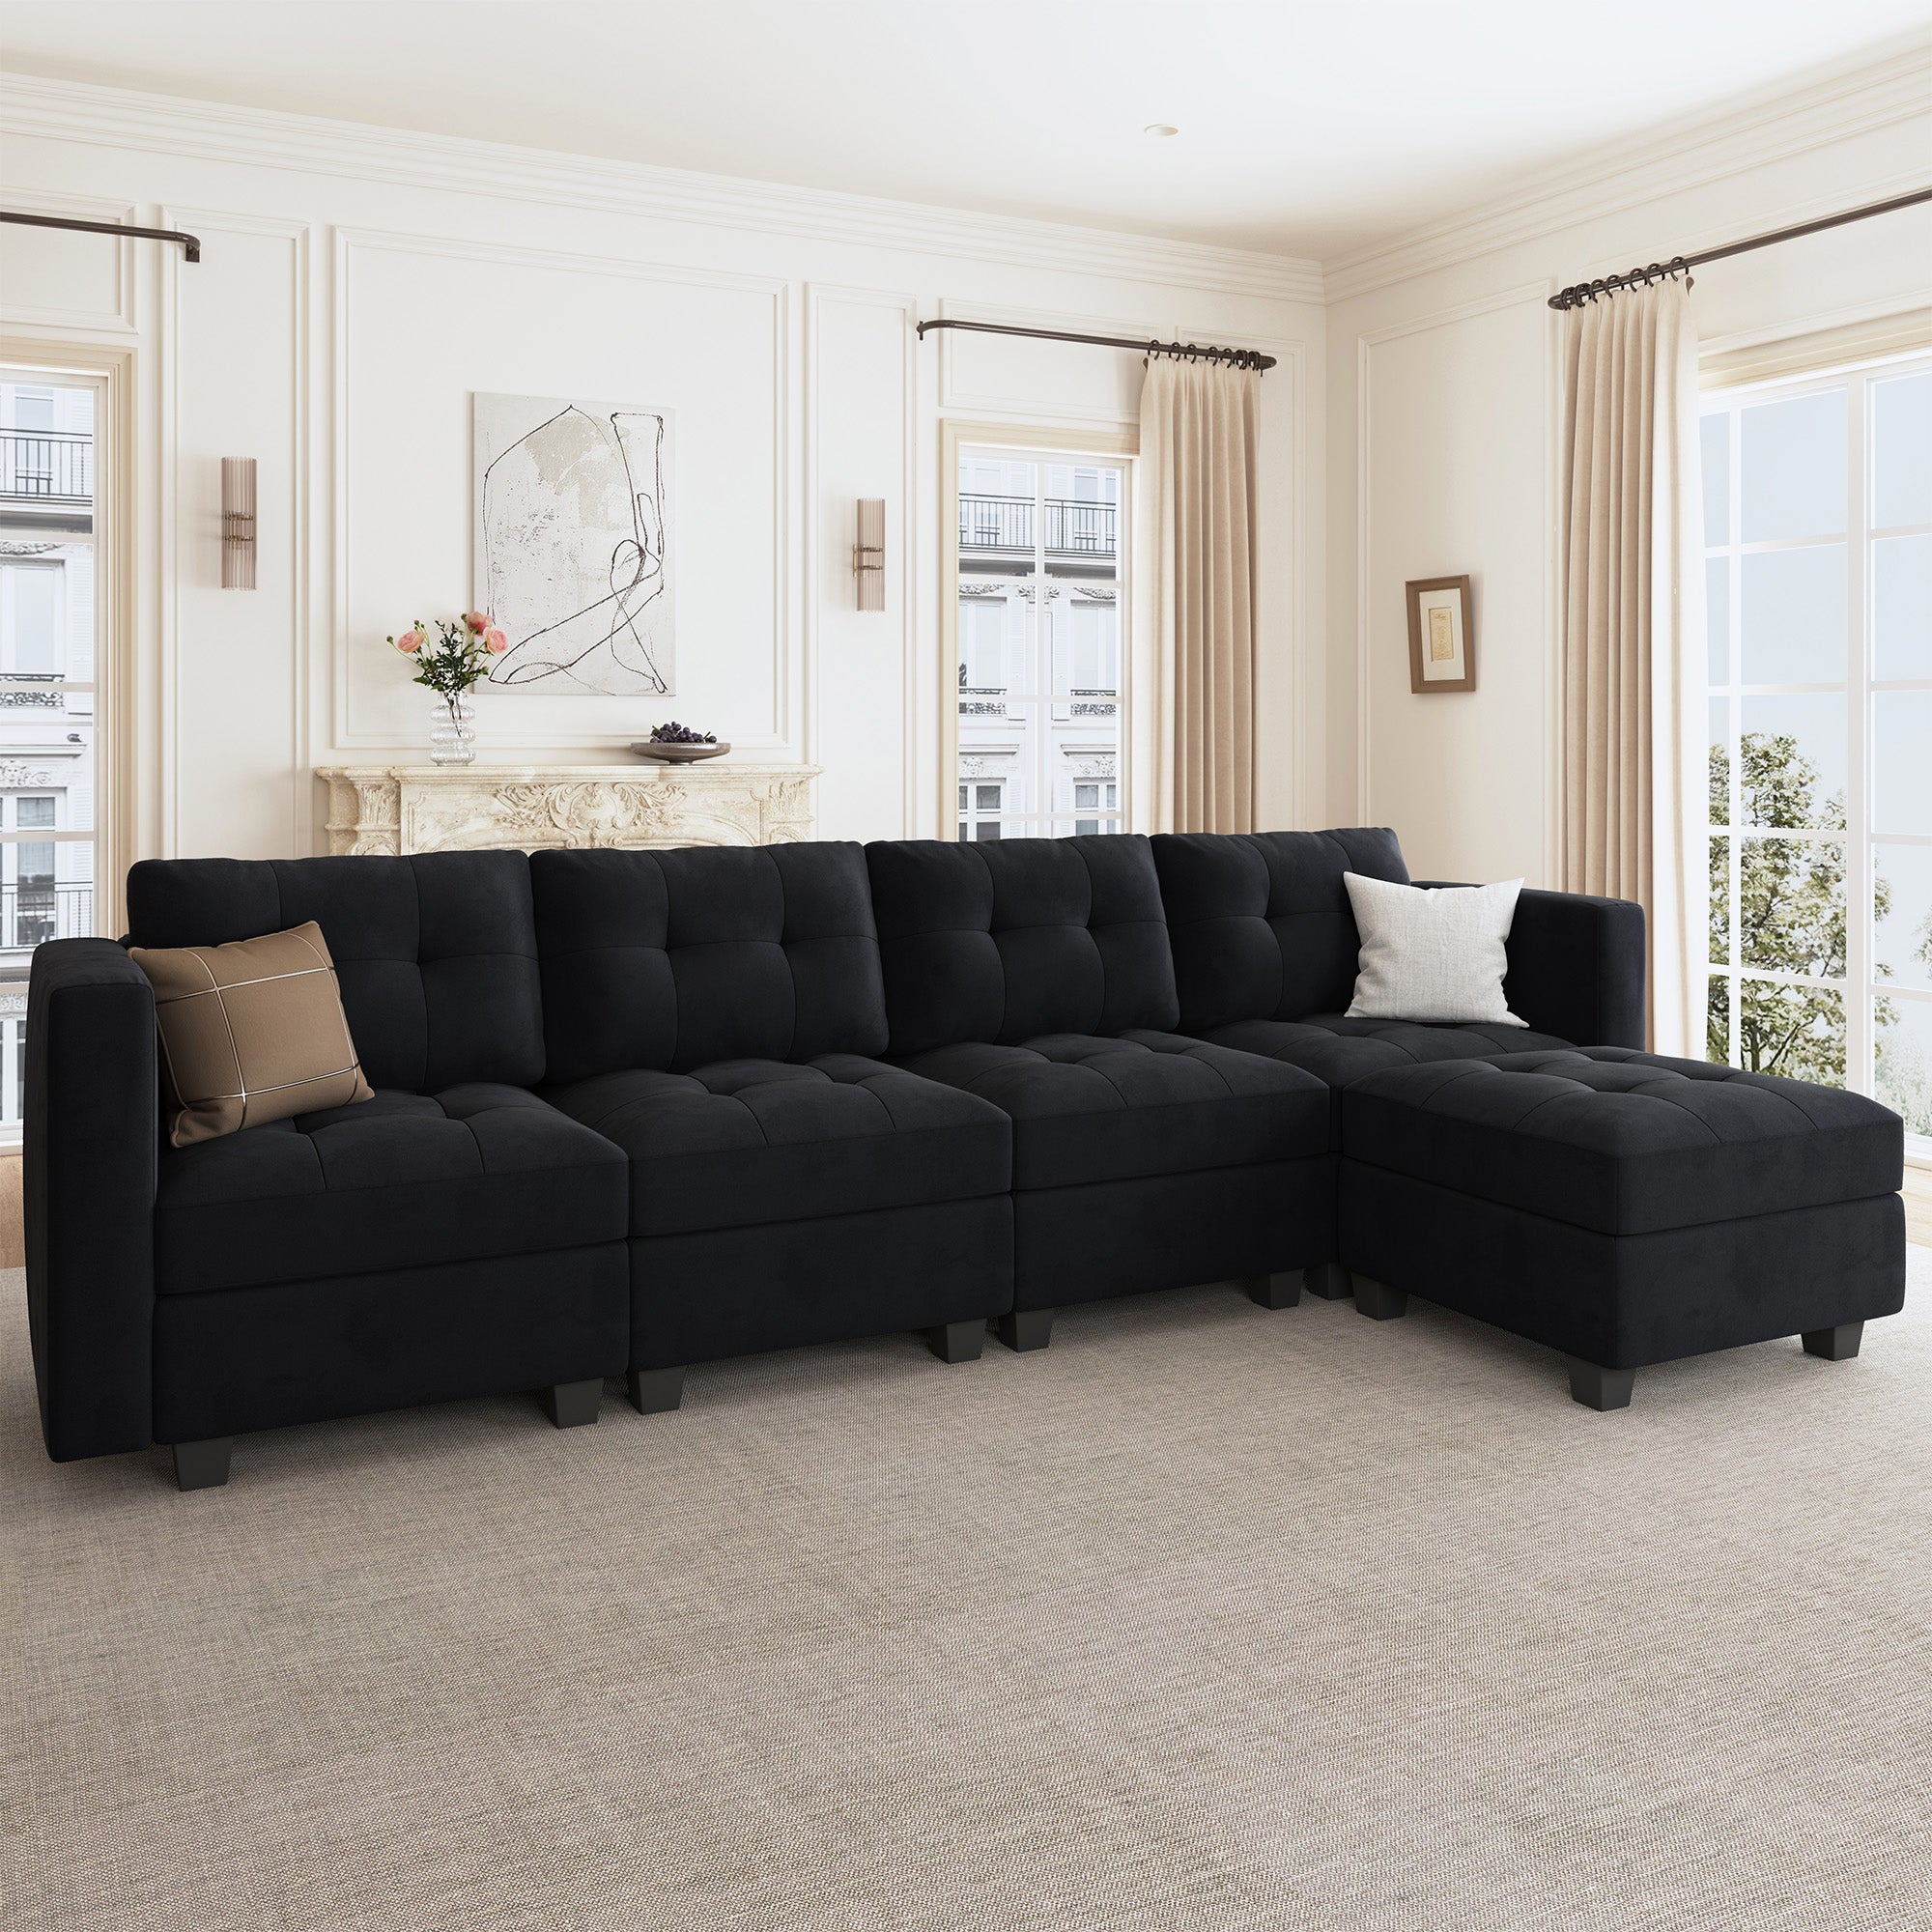 HONBAY Velvet Tufted 4-Seat L-Shaped Modular Sofa with Storage & Reversible Chaise